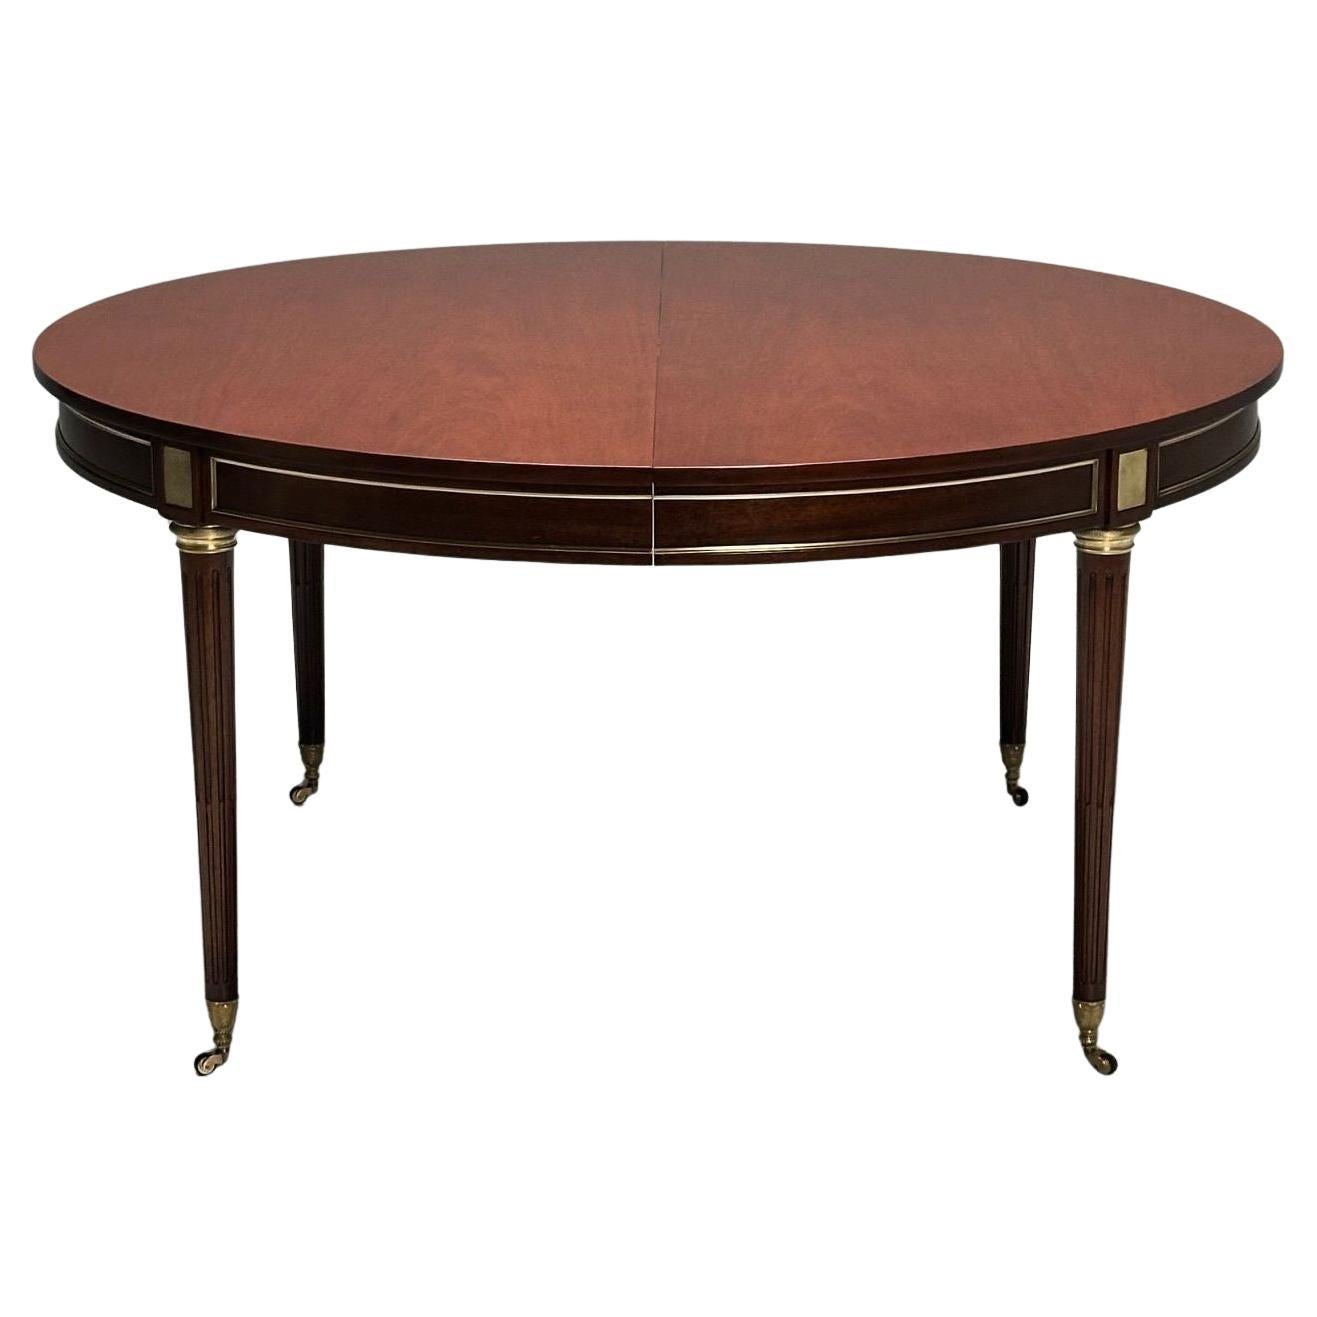 Maison Jansen Style, French Louis XVI, Dining Table, Circular, Mahogany, Bronze For Sale